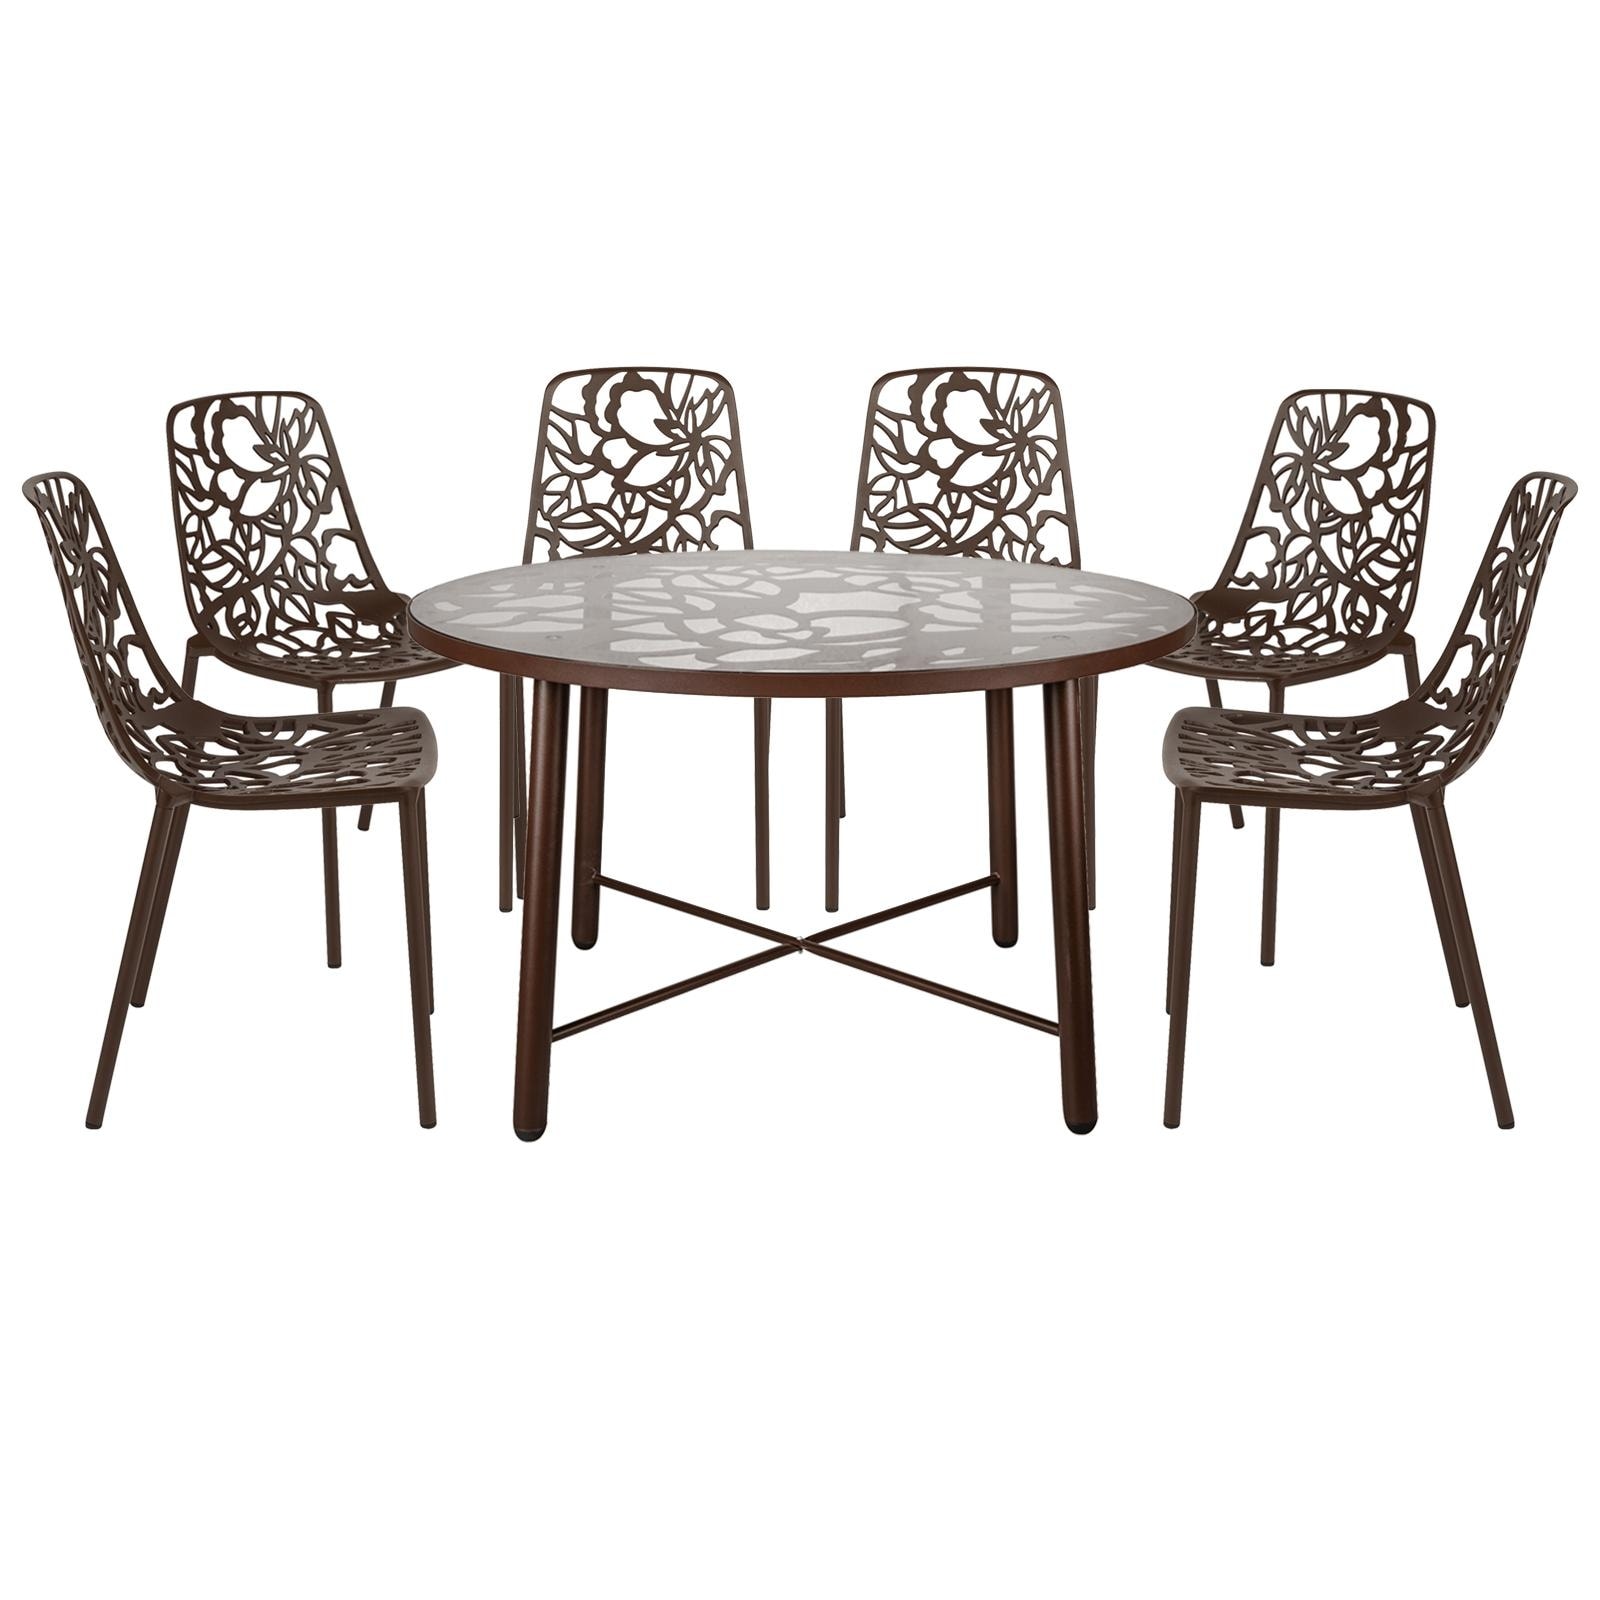 Leisuremod Devon 7-piece Aluminum Dining Set With Table And 6 Chairs